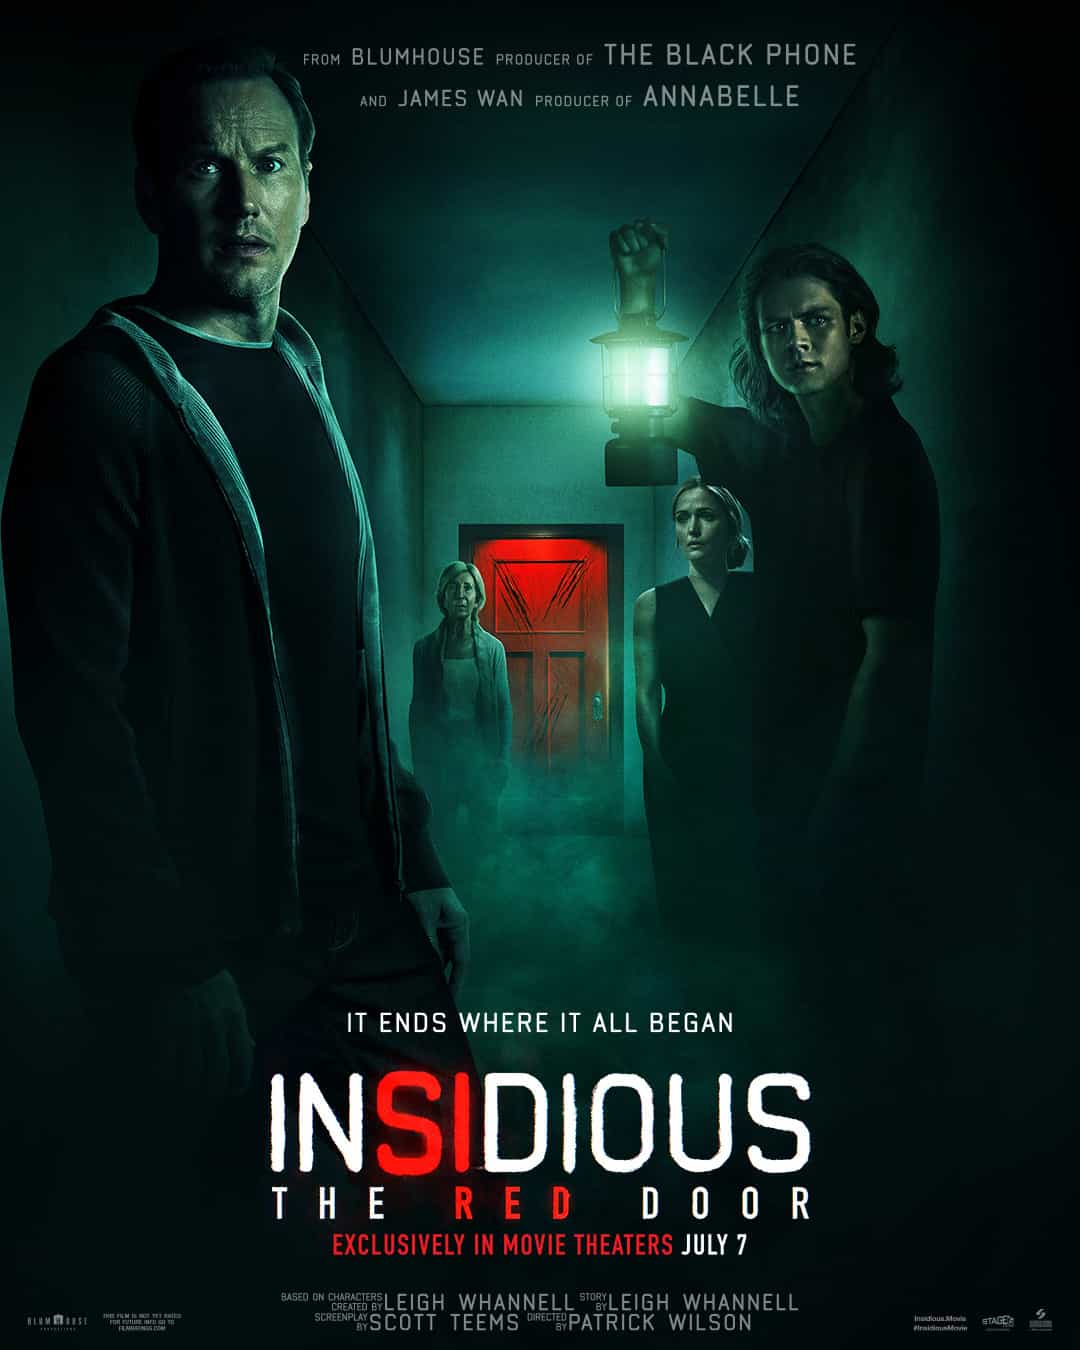 Global Box Office Weekend Report 7th - 9th July 2023:  Insidious: The Red Door tops the global box office on its debut with a $64 Million gross